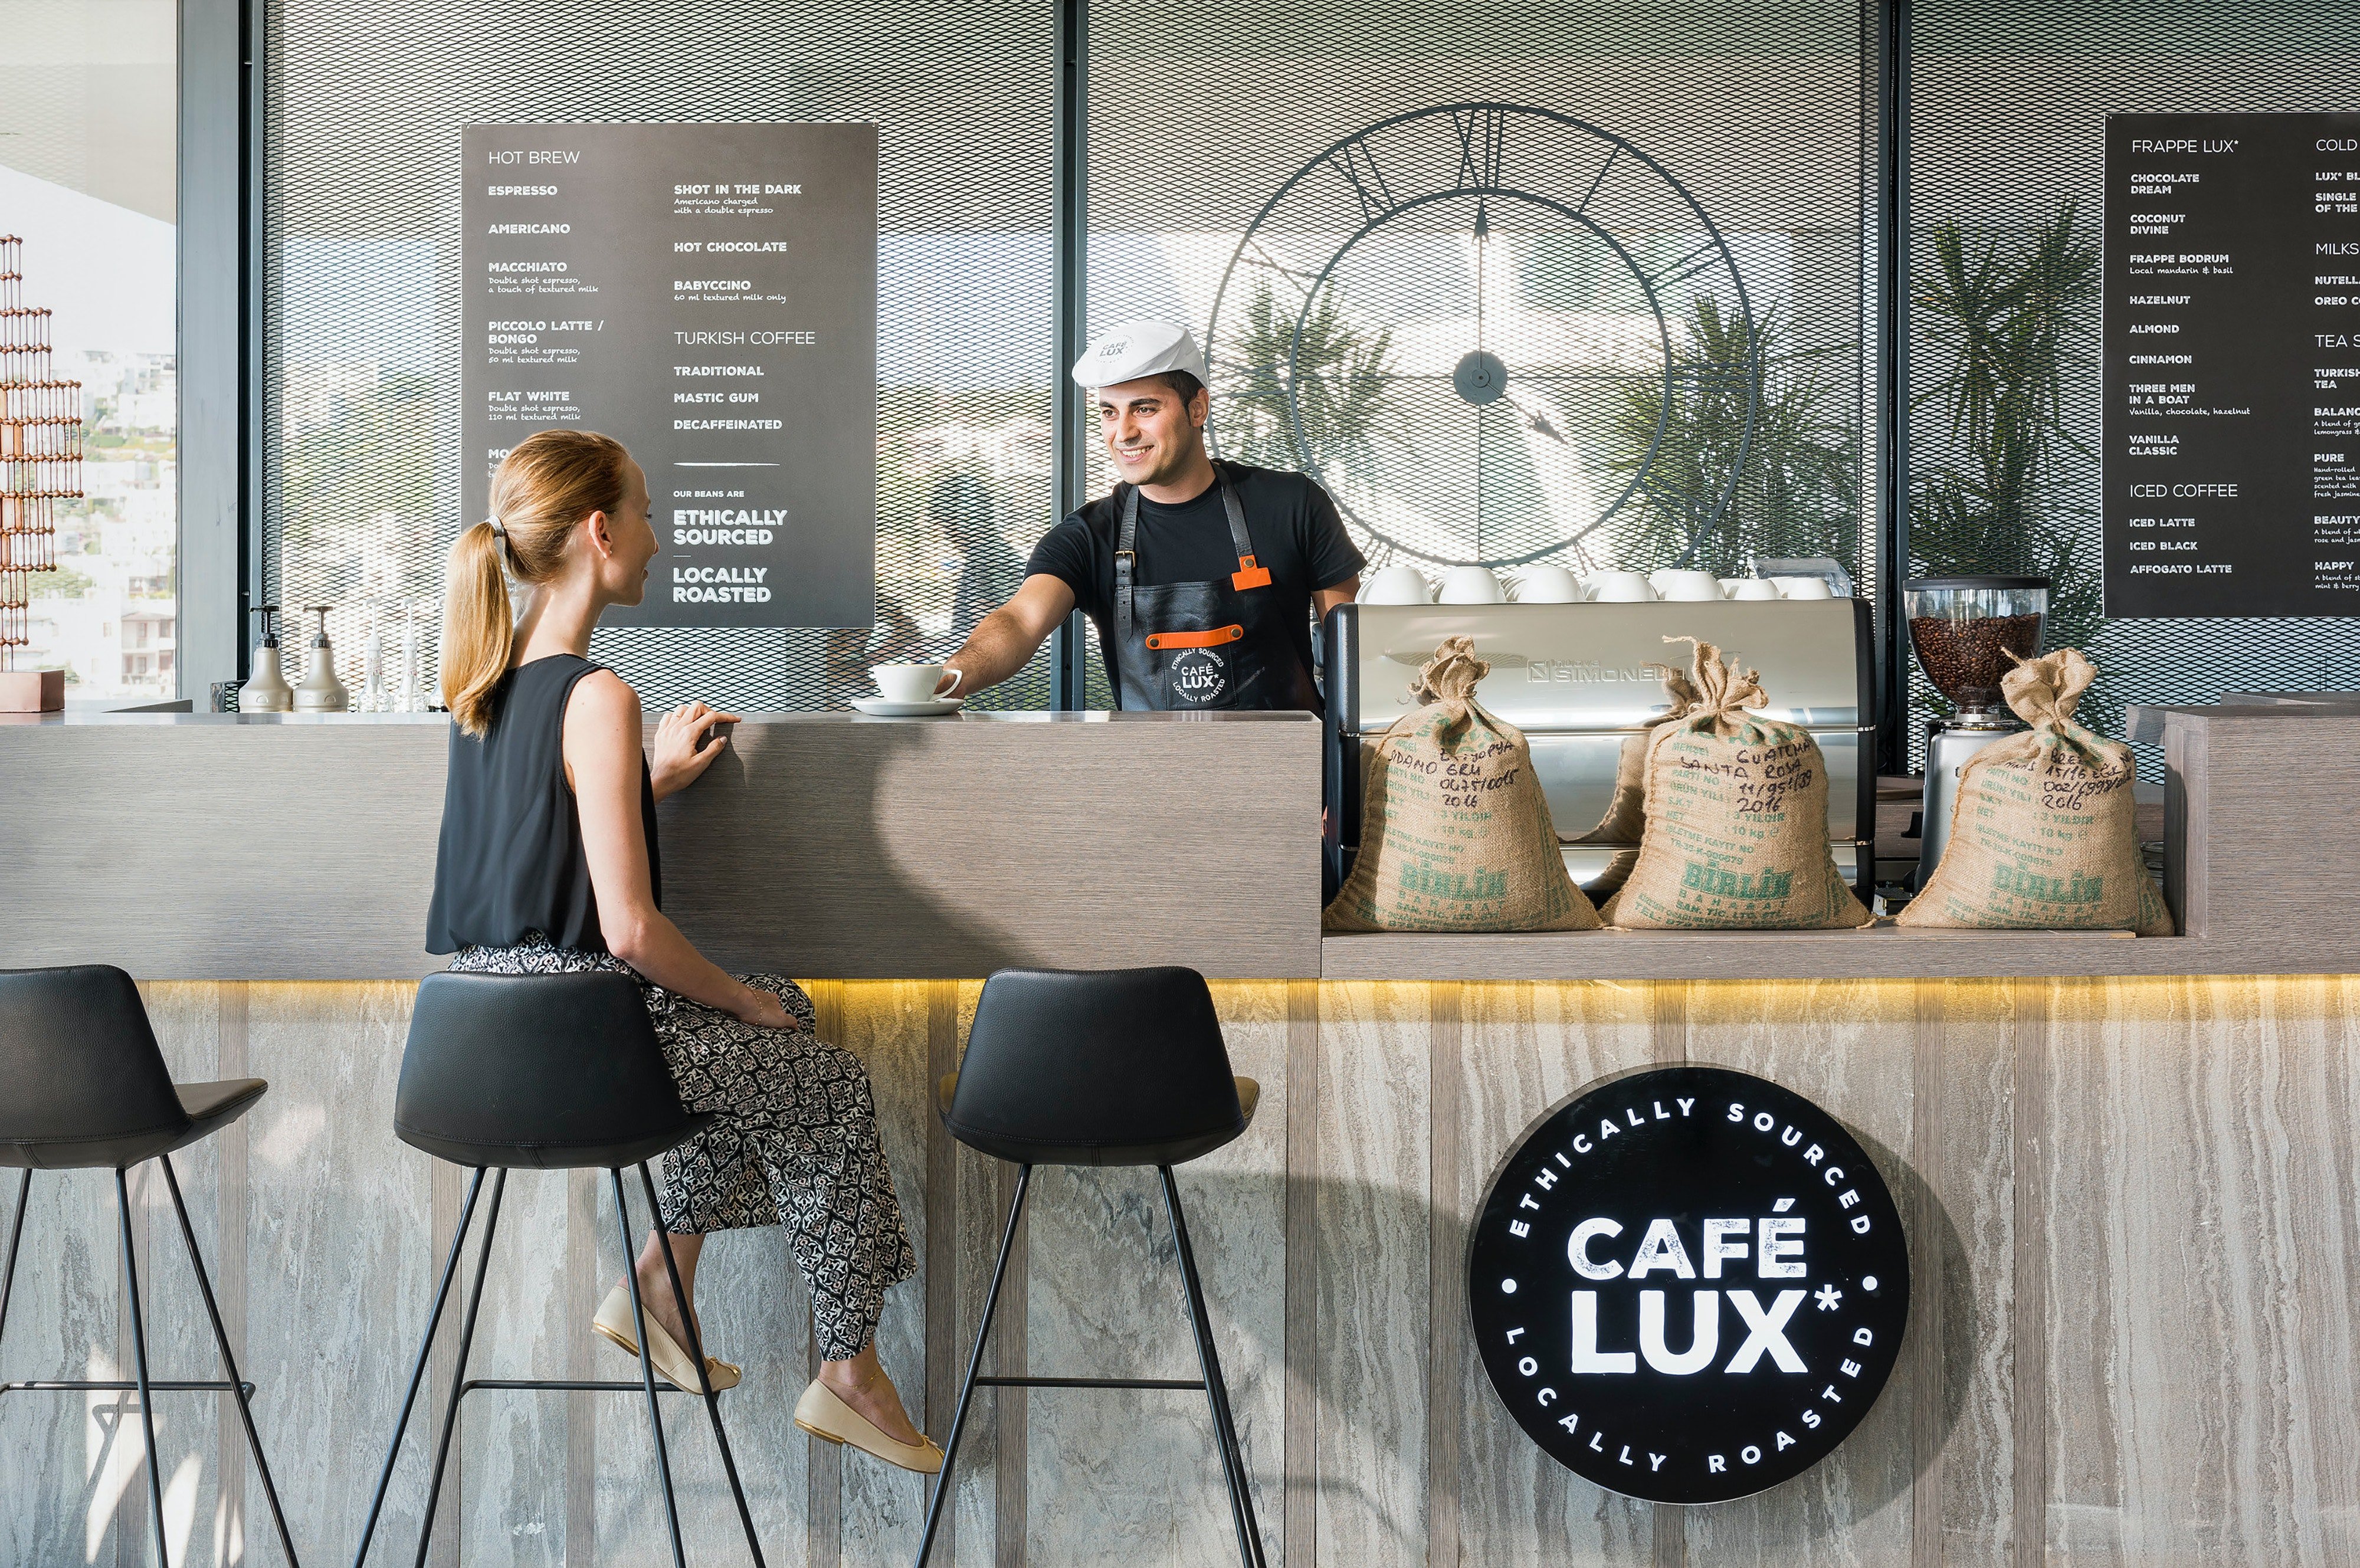 Samantha re-opened the cafe, and it became a crowd favorite. | Source: Pexels